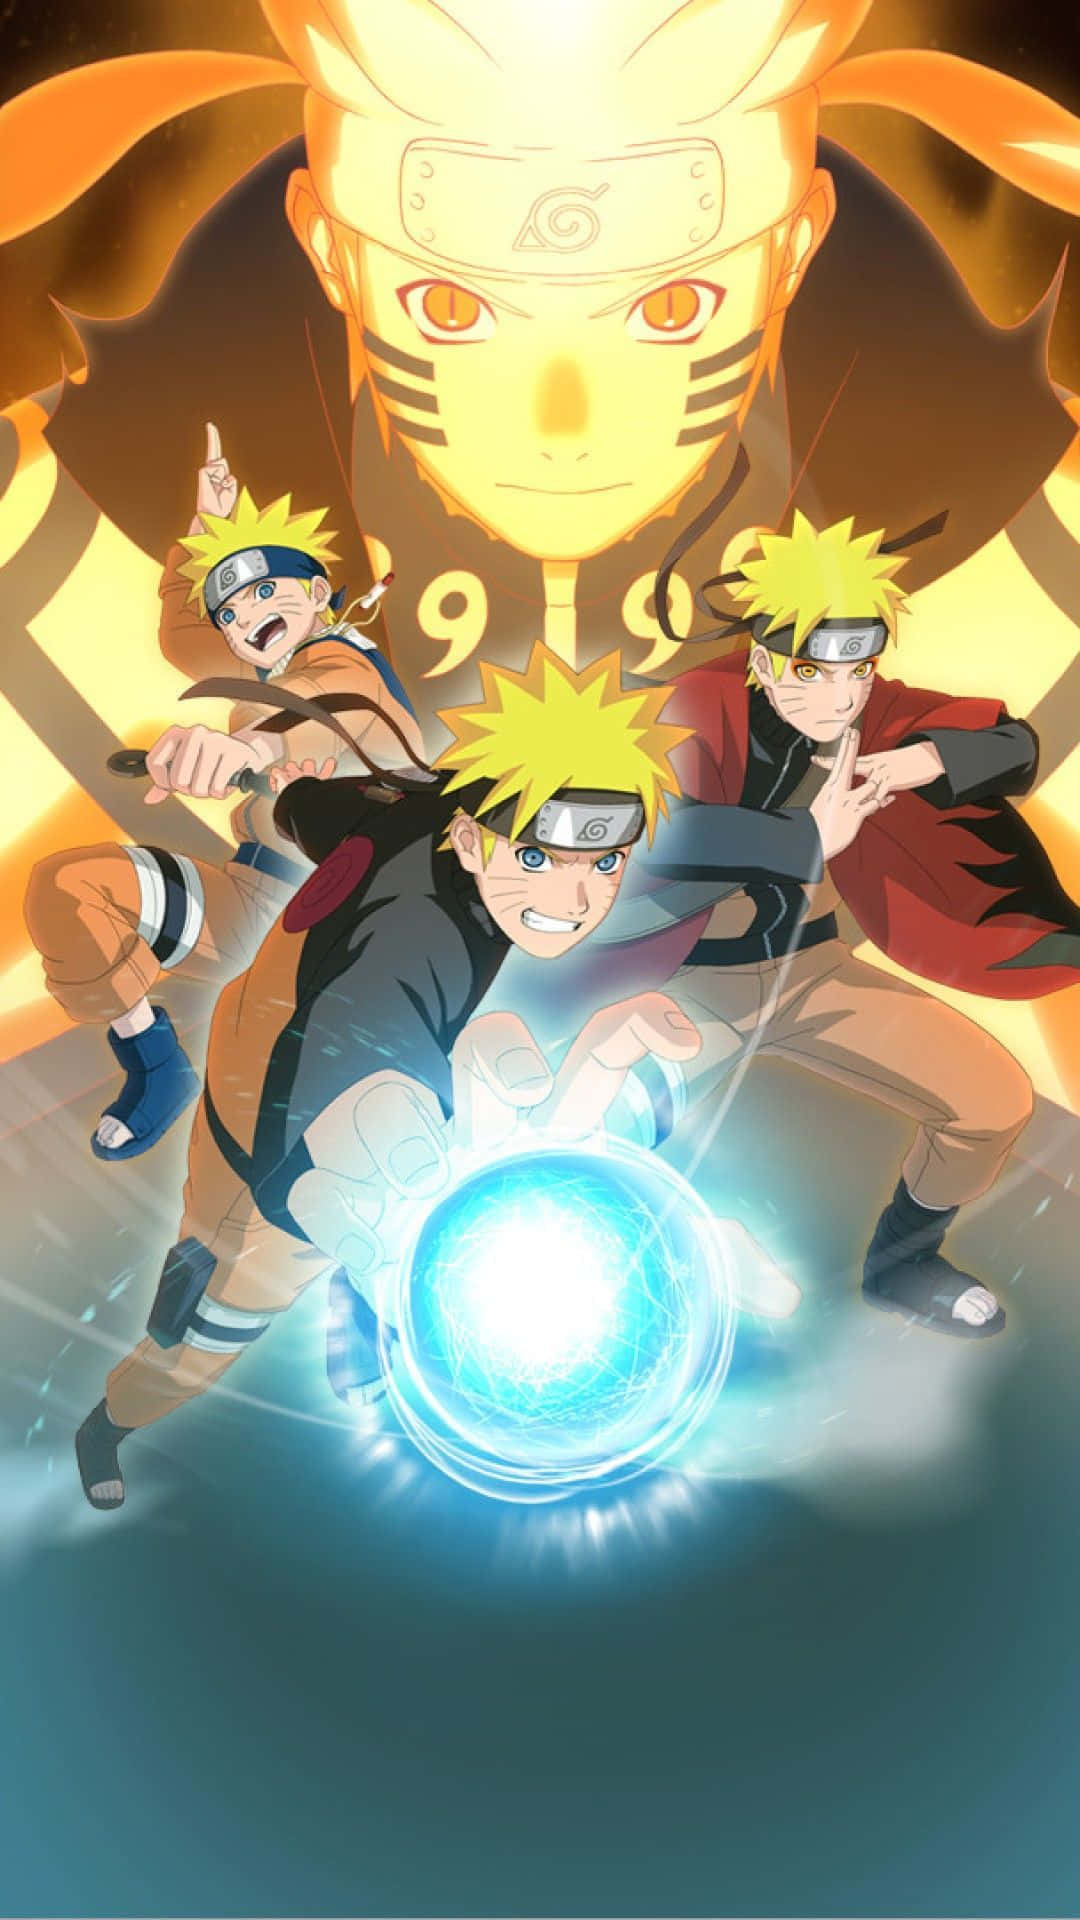 Dynamic Naruto Action Scene on Your Phone Screen